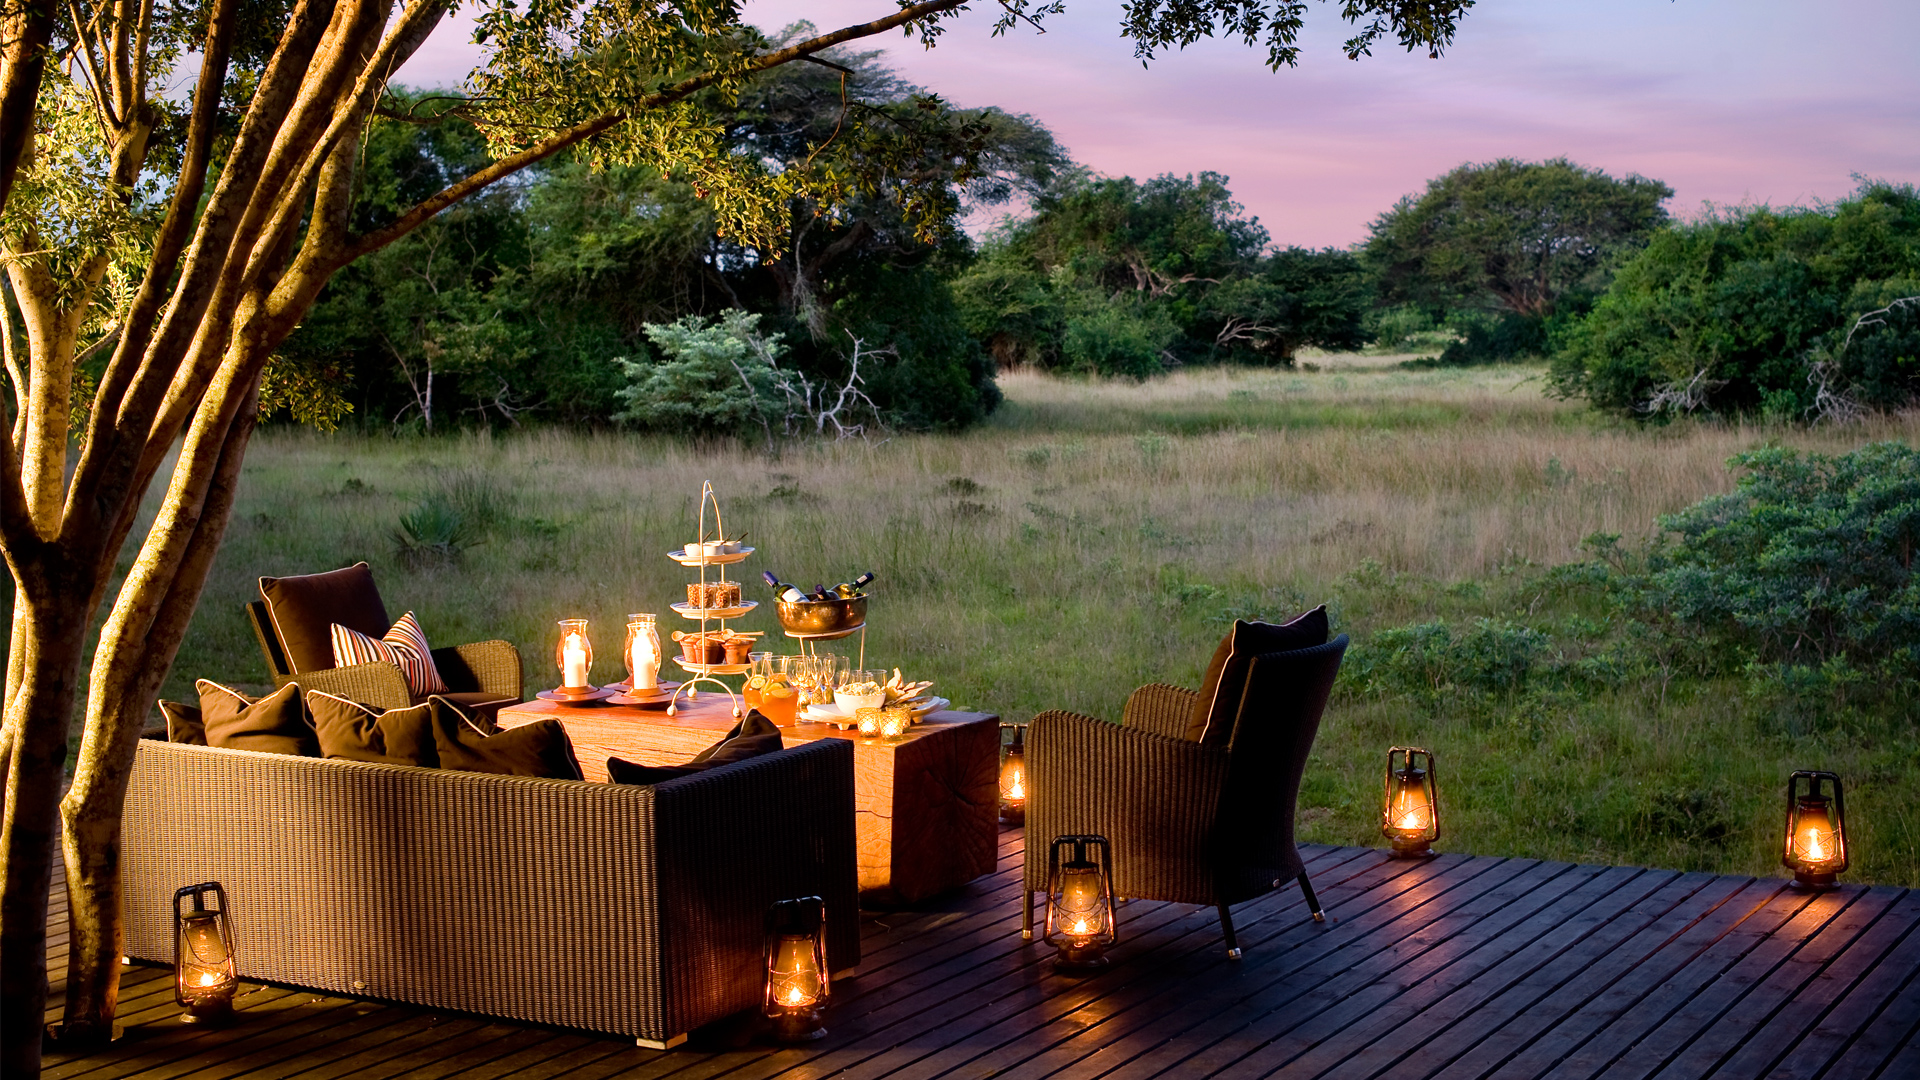 twilight, outdoor table and chairs, candles